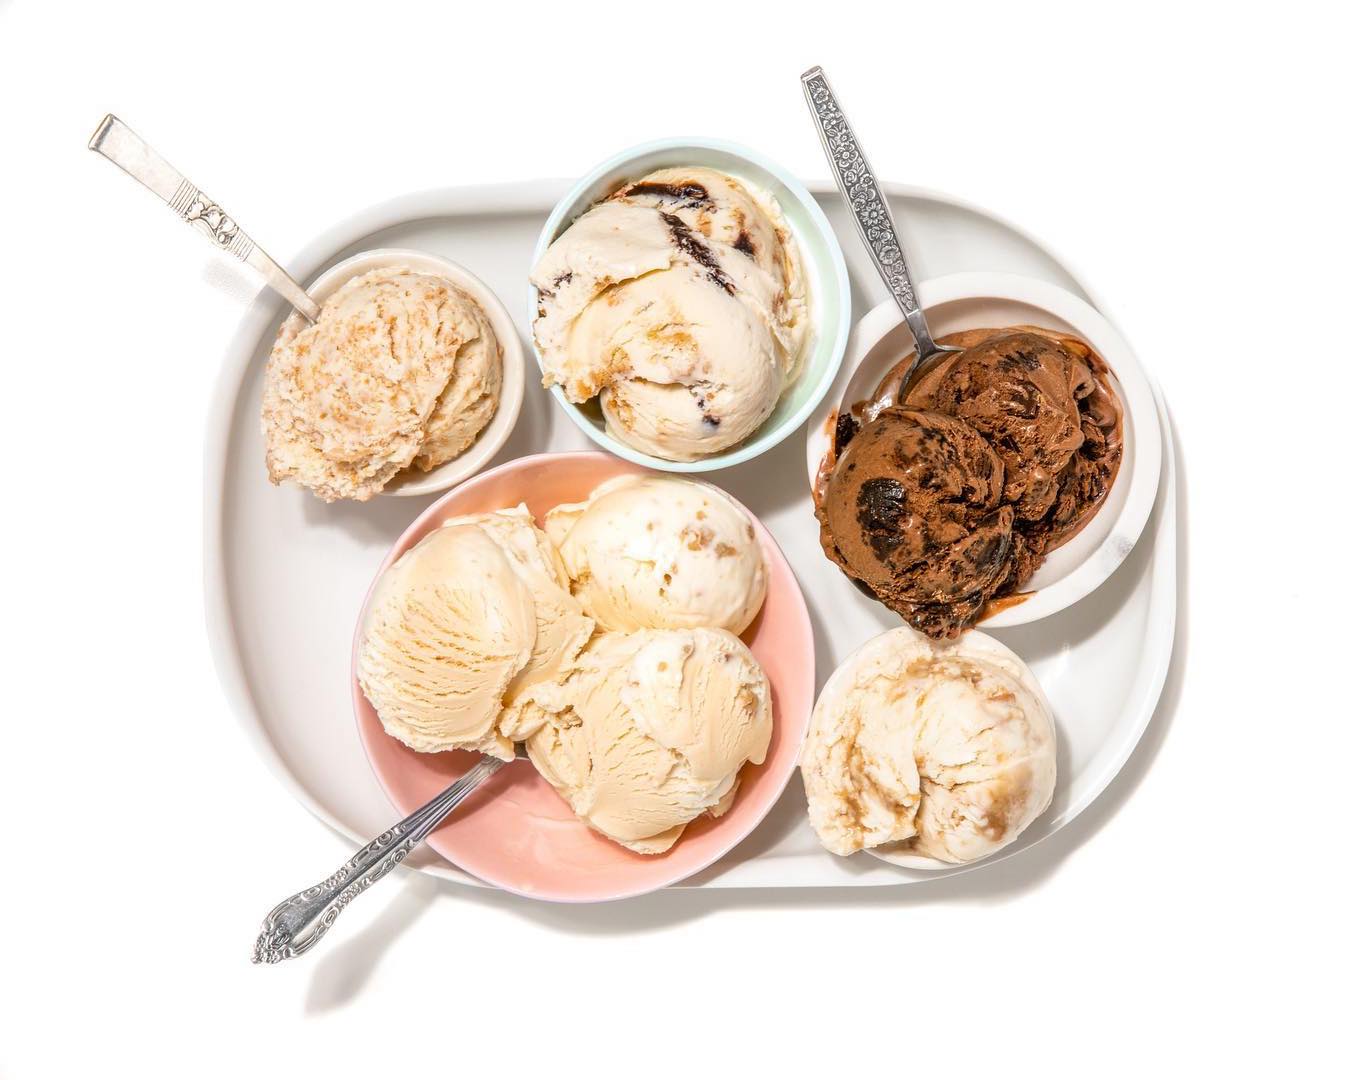 Scoops of various ice creams in various bowls and plates with spoons